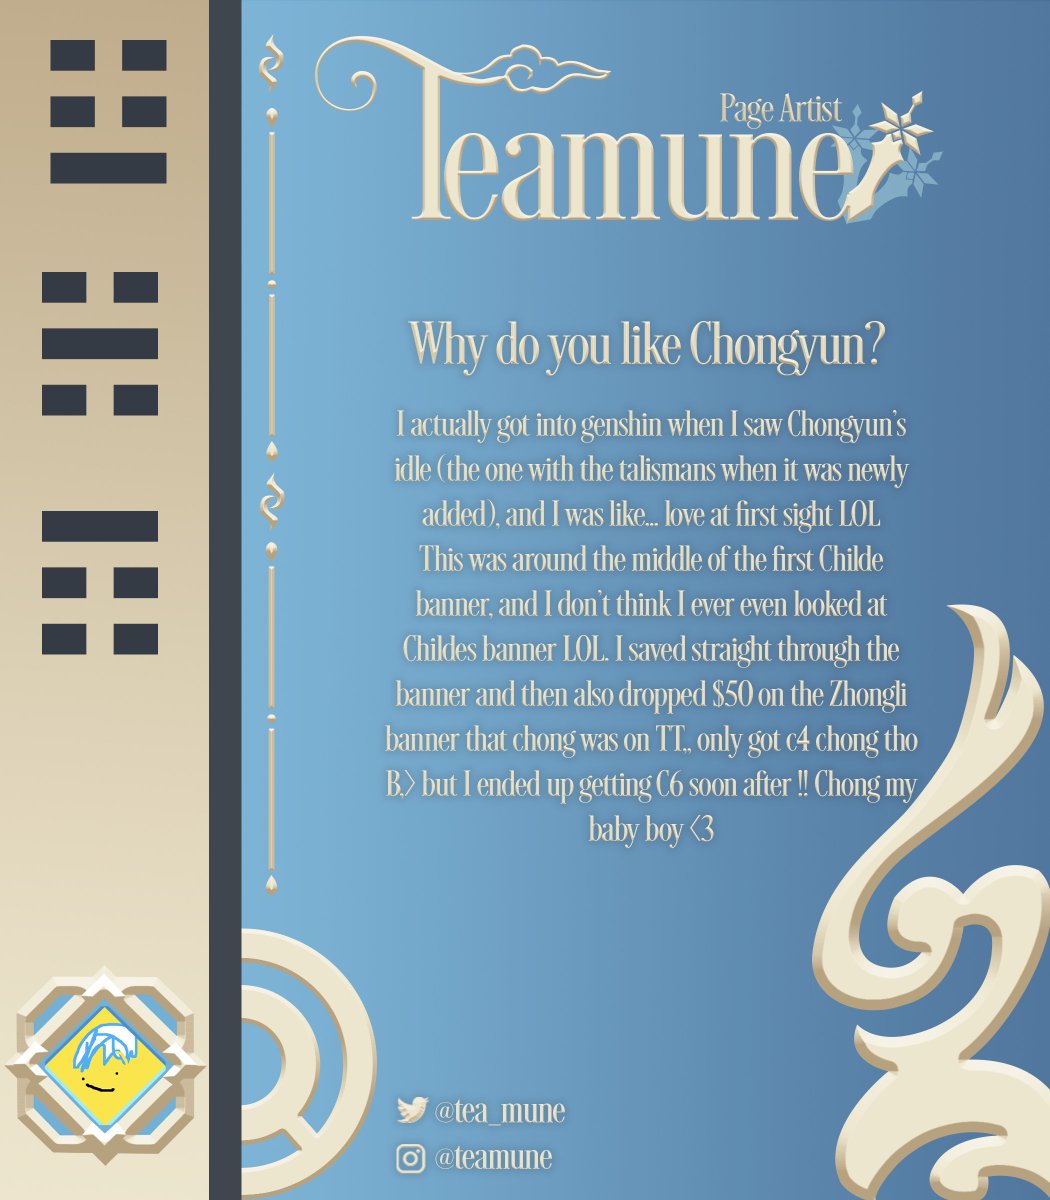 ❄️ CONTRIBUTOR INTRO ❄️

Please welcome our forty first contributor, Teamune! They will be working as a page artist for this project!

❅ Twitter: @Tea_mune 
❅ Instagram: teamune